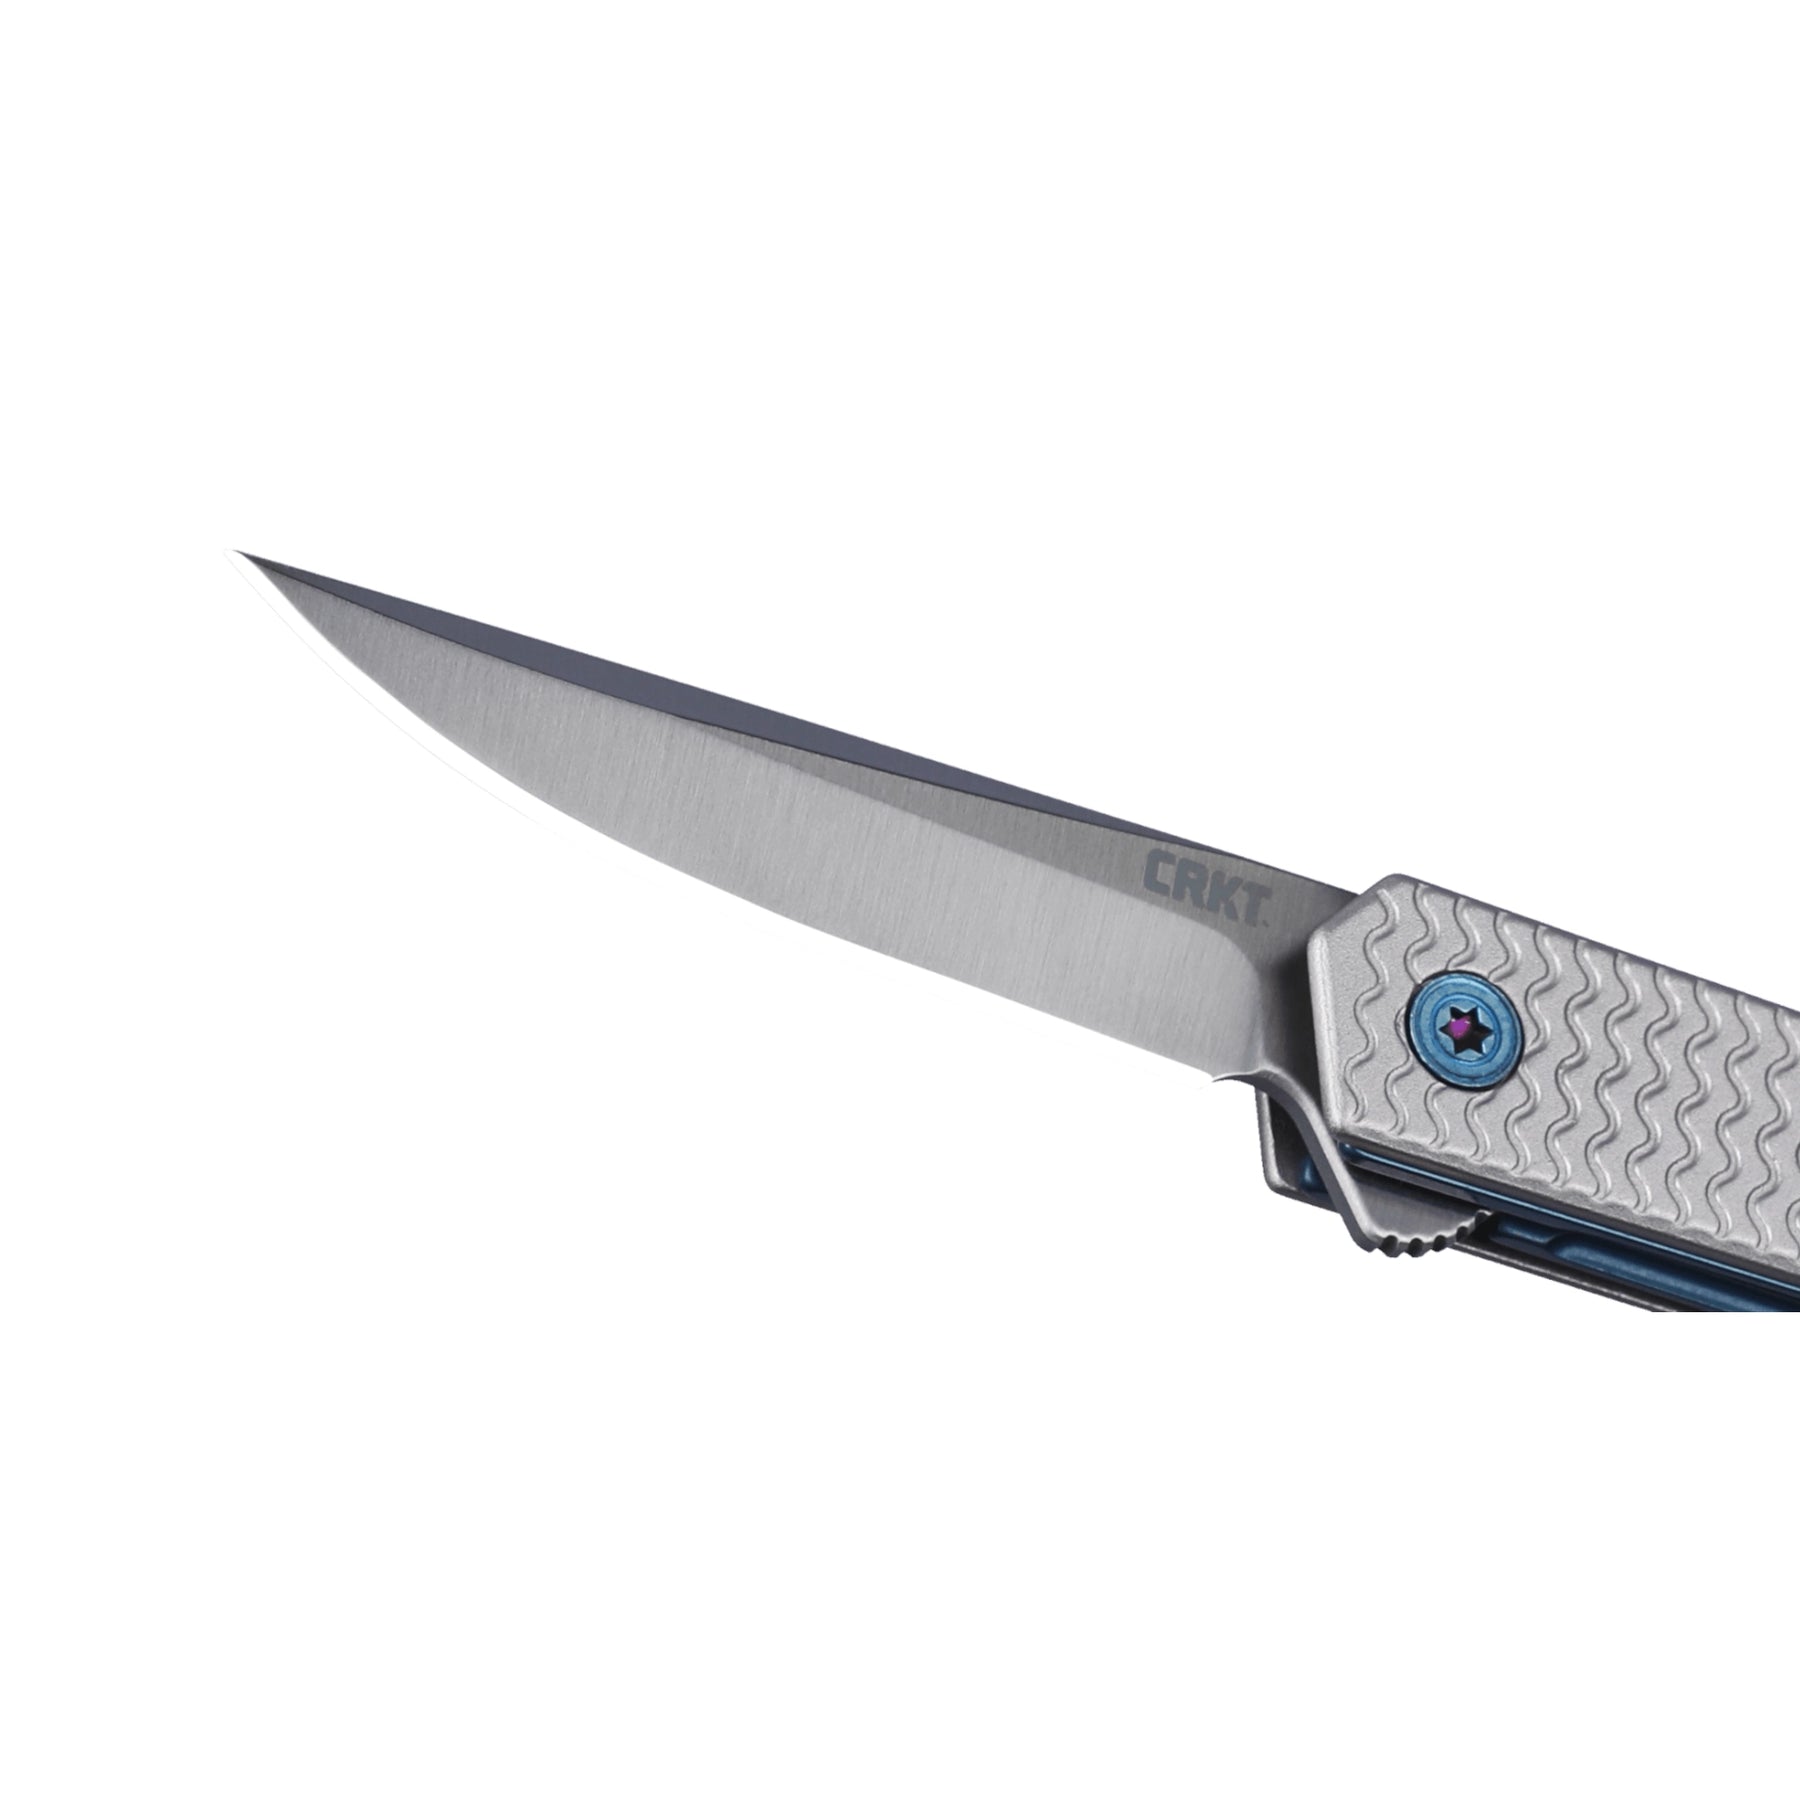 CRKT - CEO MICROFLIPPER drop point by Richard Rogers